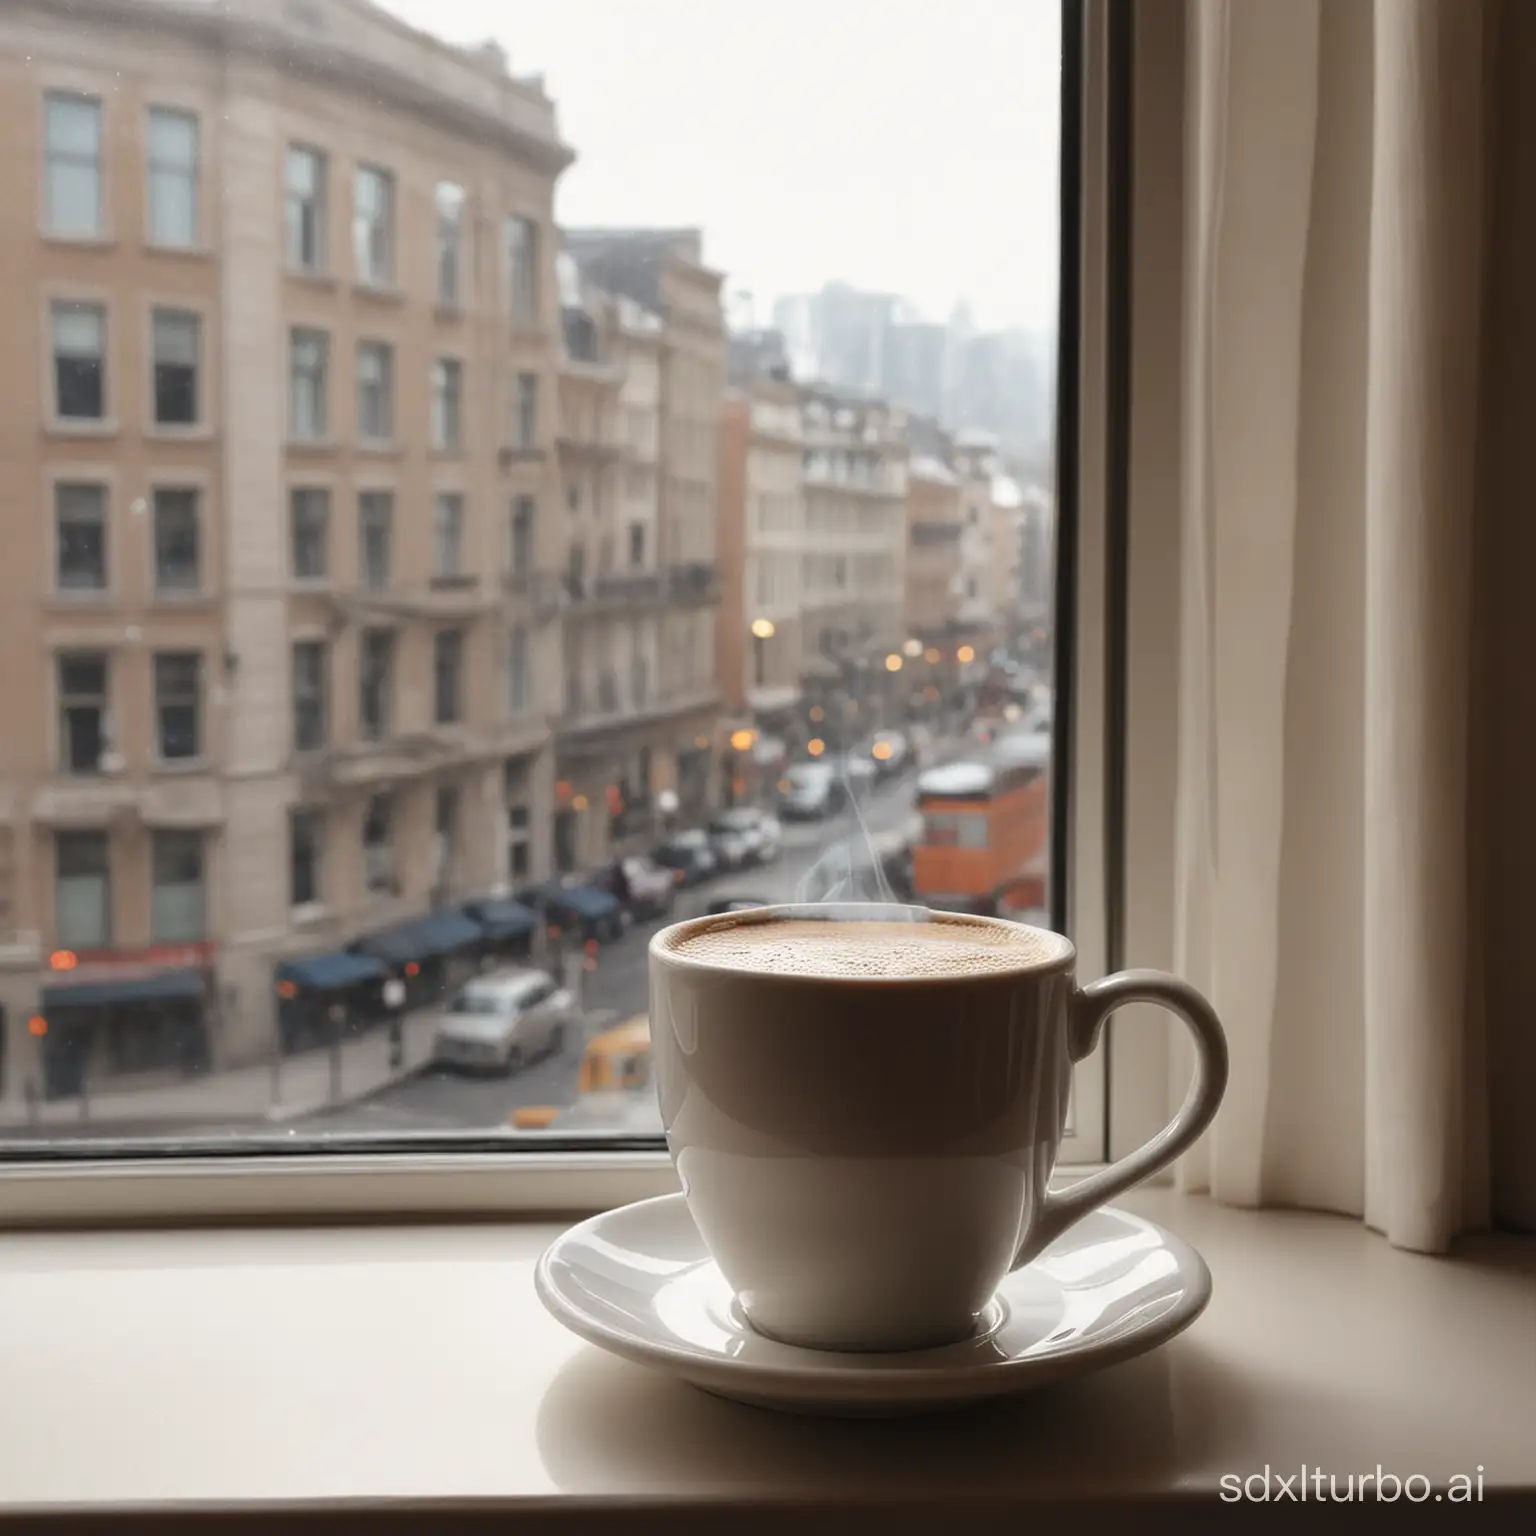 Cozy-Morning-Enjoying-a-Hot-Cup-of-Coffee-by-the-Window